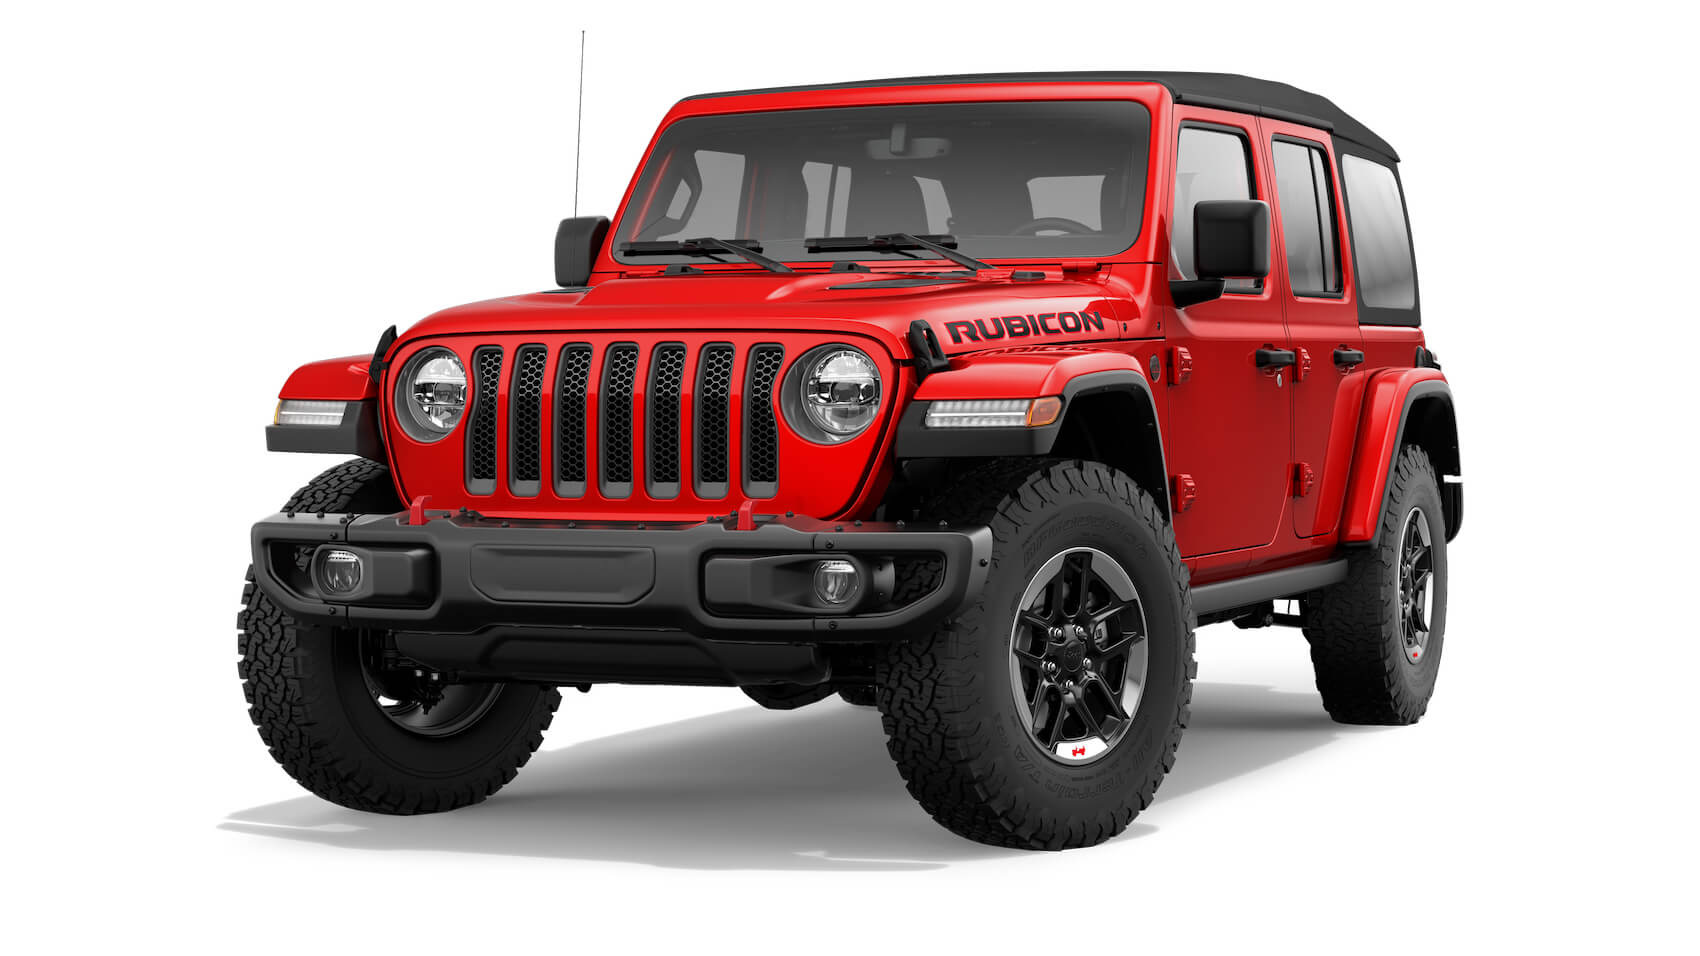 2020 Jeep Wrangler at Jeep Dealer in PA